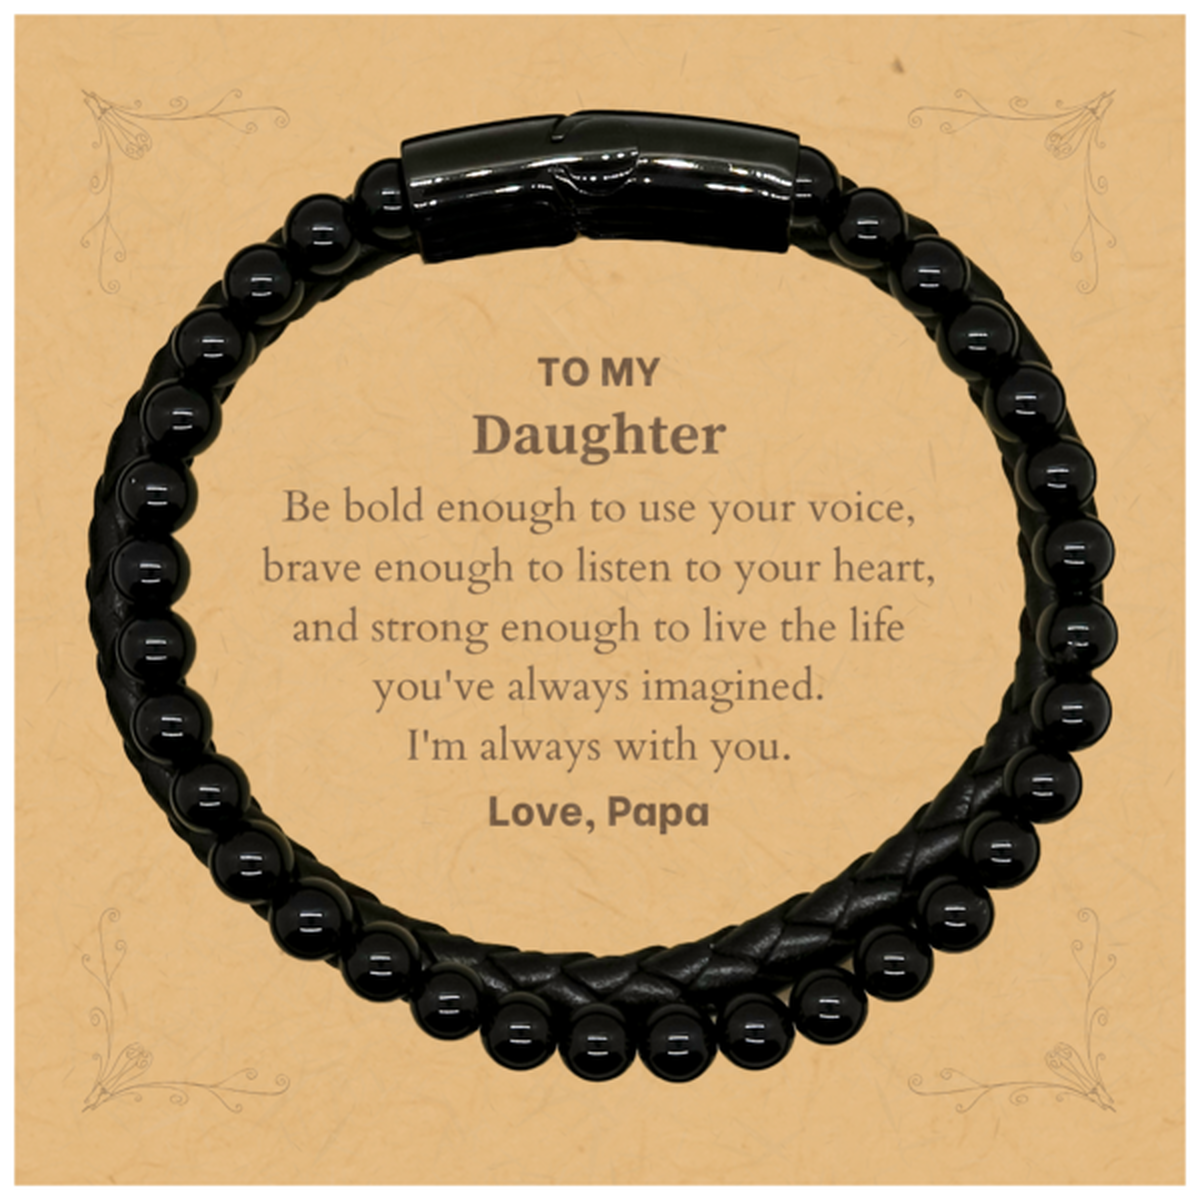 Keepsake Daughter Stone Leather Bracelets Gift Idea Graduation Christmas Birthday Daughter from Papa, Daughter Be bold enough to use your voice, brave enough to listen to your heart. Love, Papa